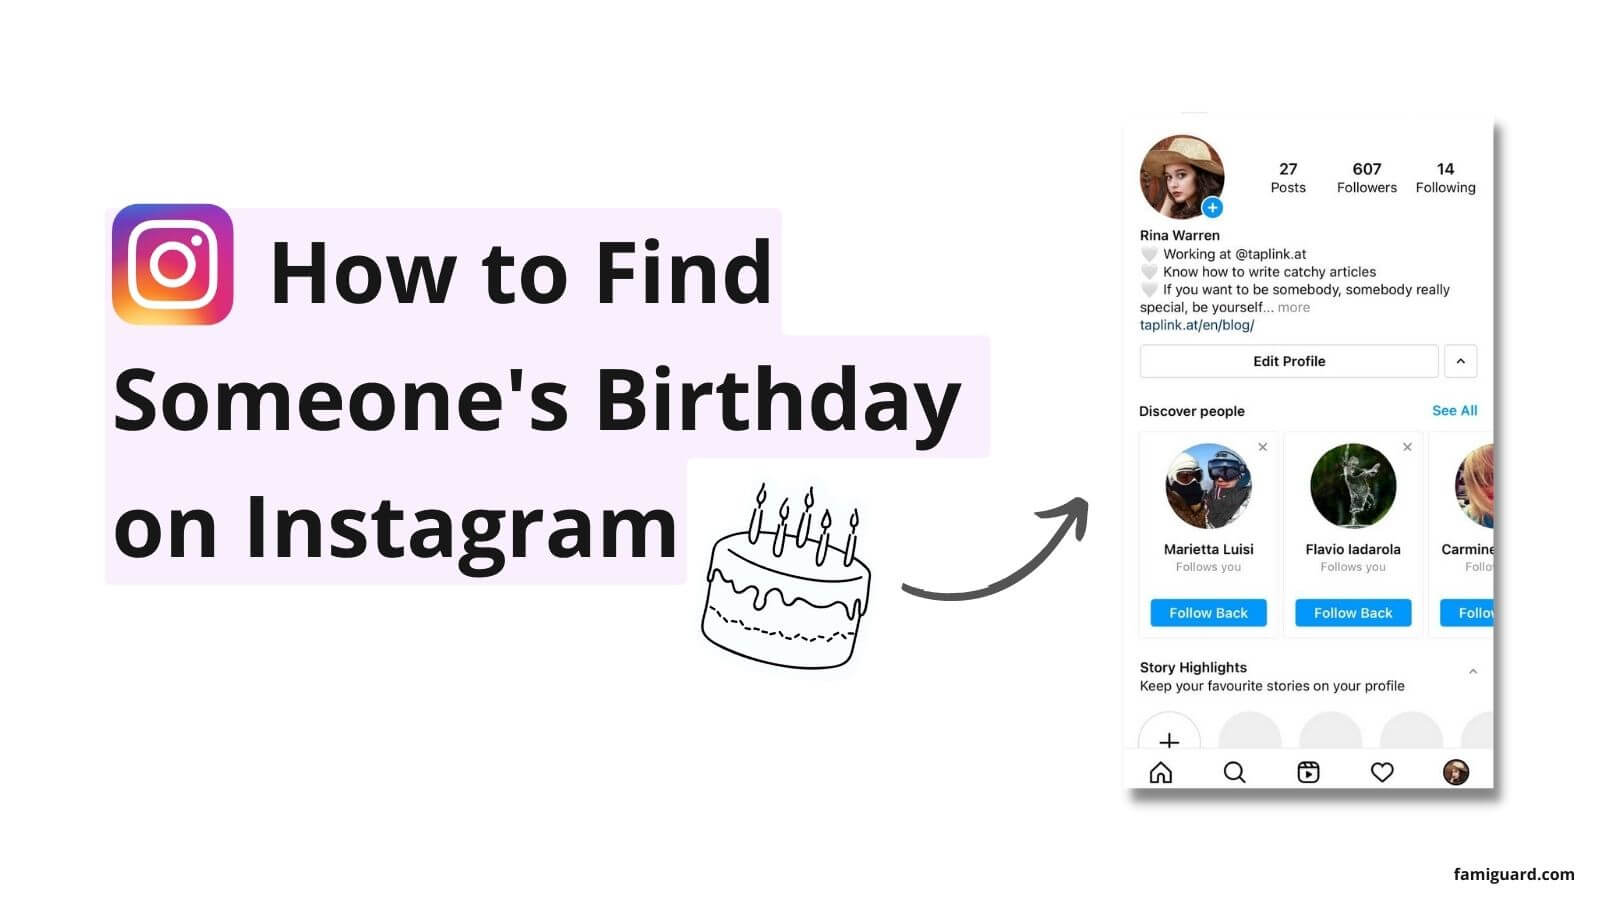 How to Find Someone's Birthday on Instagram